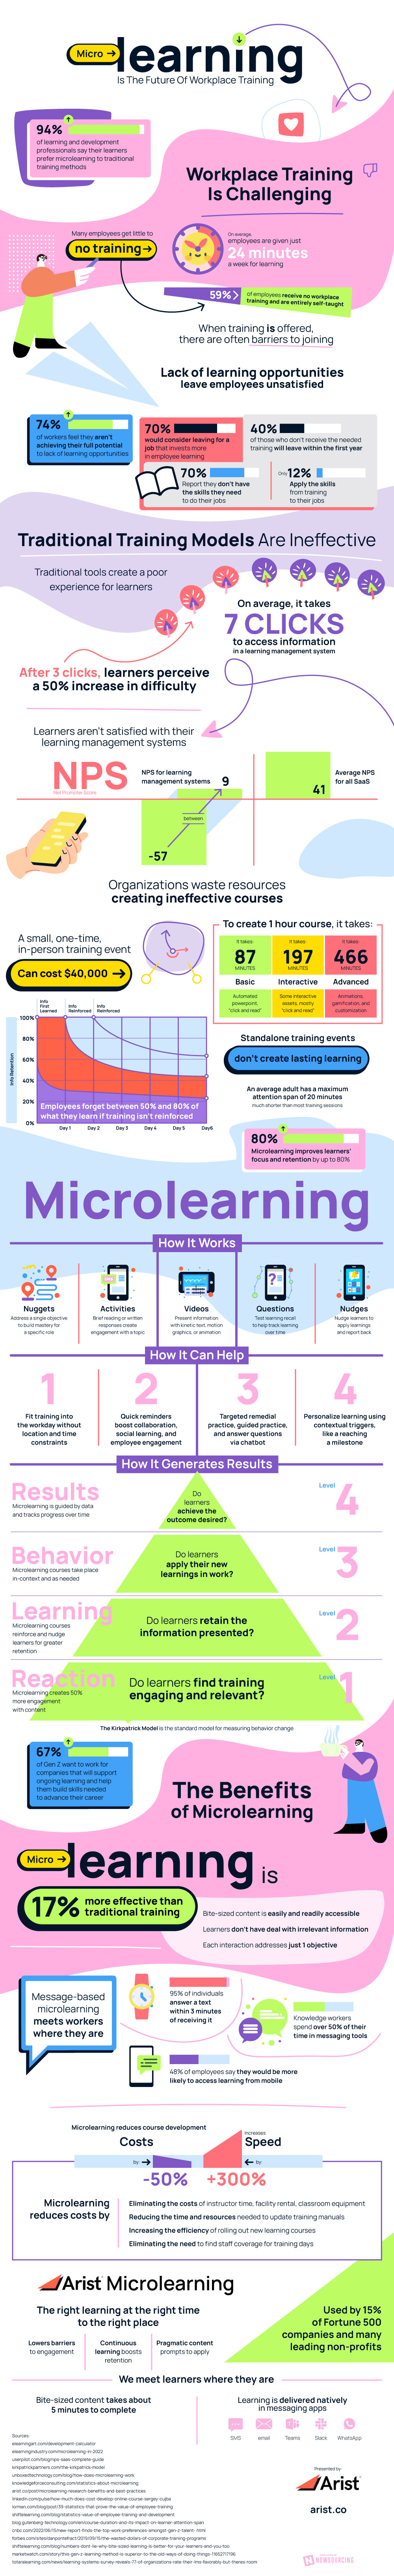 microlearning is the future of workplace training Microlearning - The Future of Workplace Training